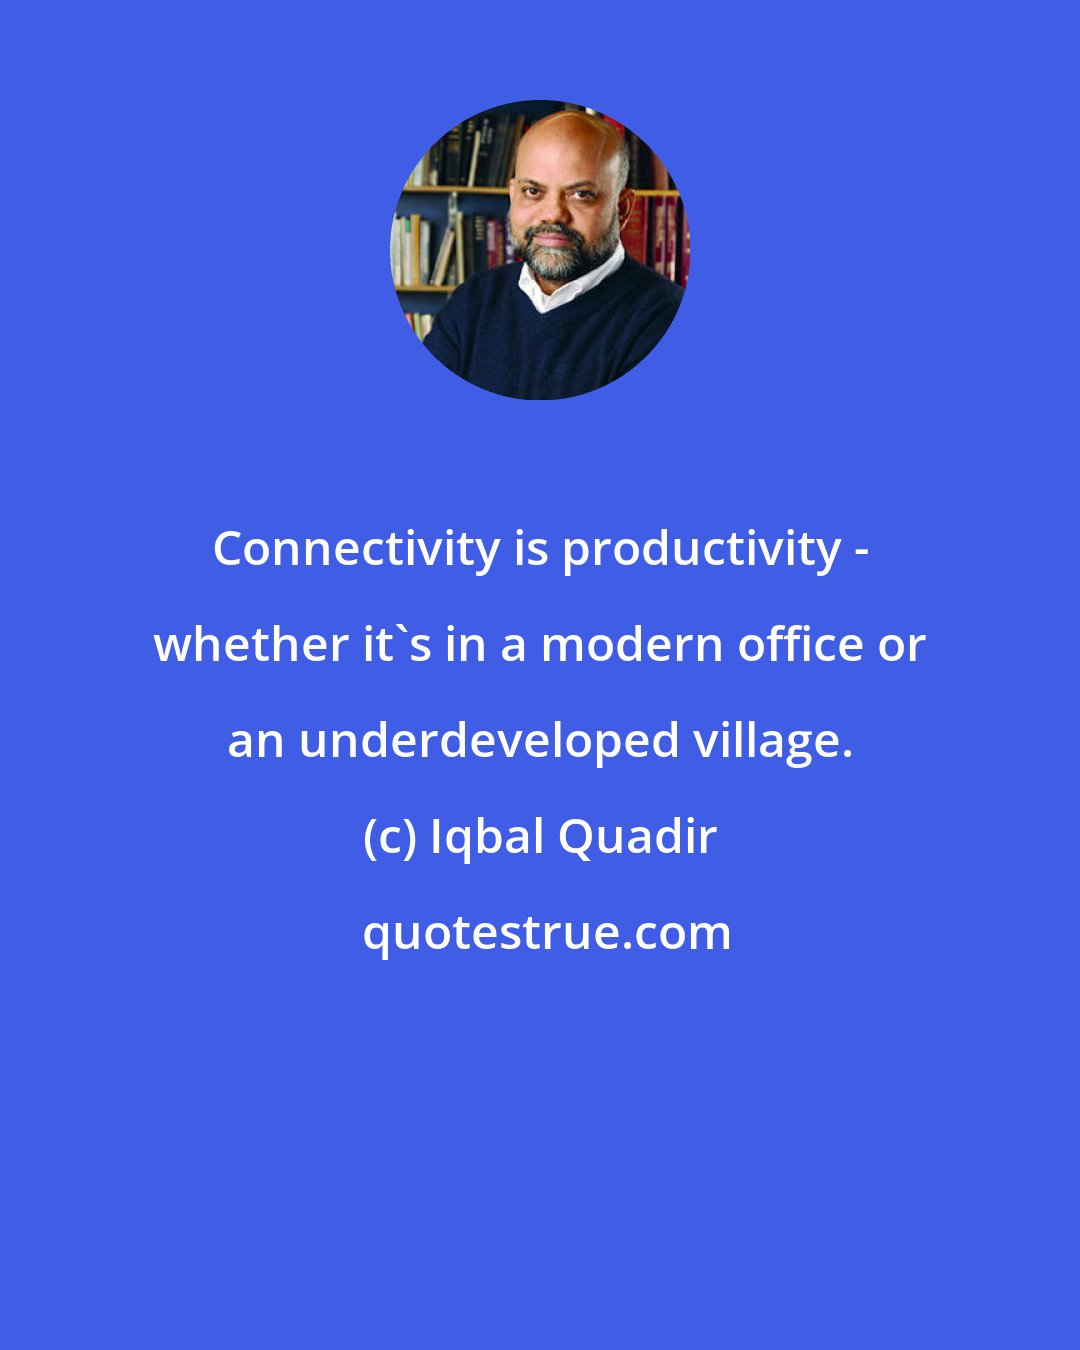 Iqbal Quadir: Connectivity is productivity - whether it's in a modern office or an underdeveloped village.